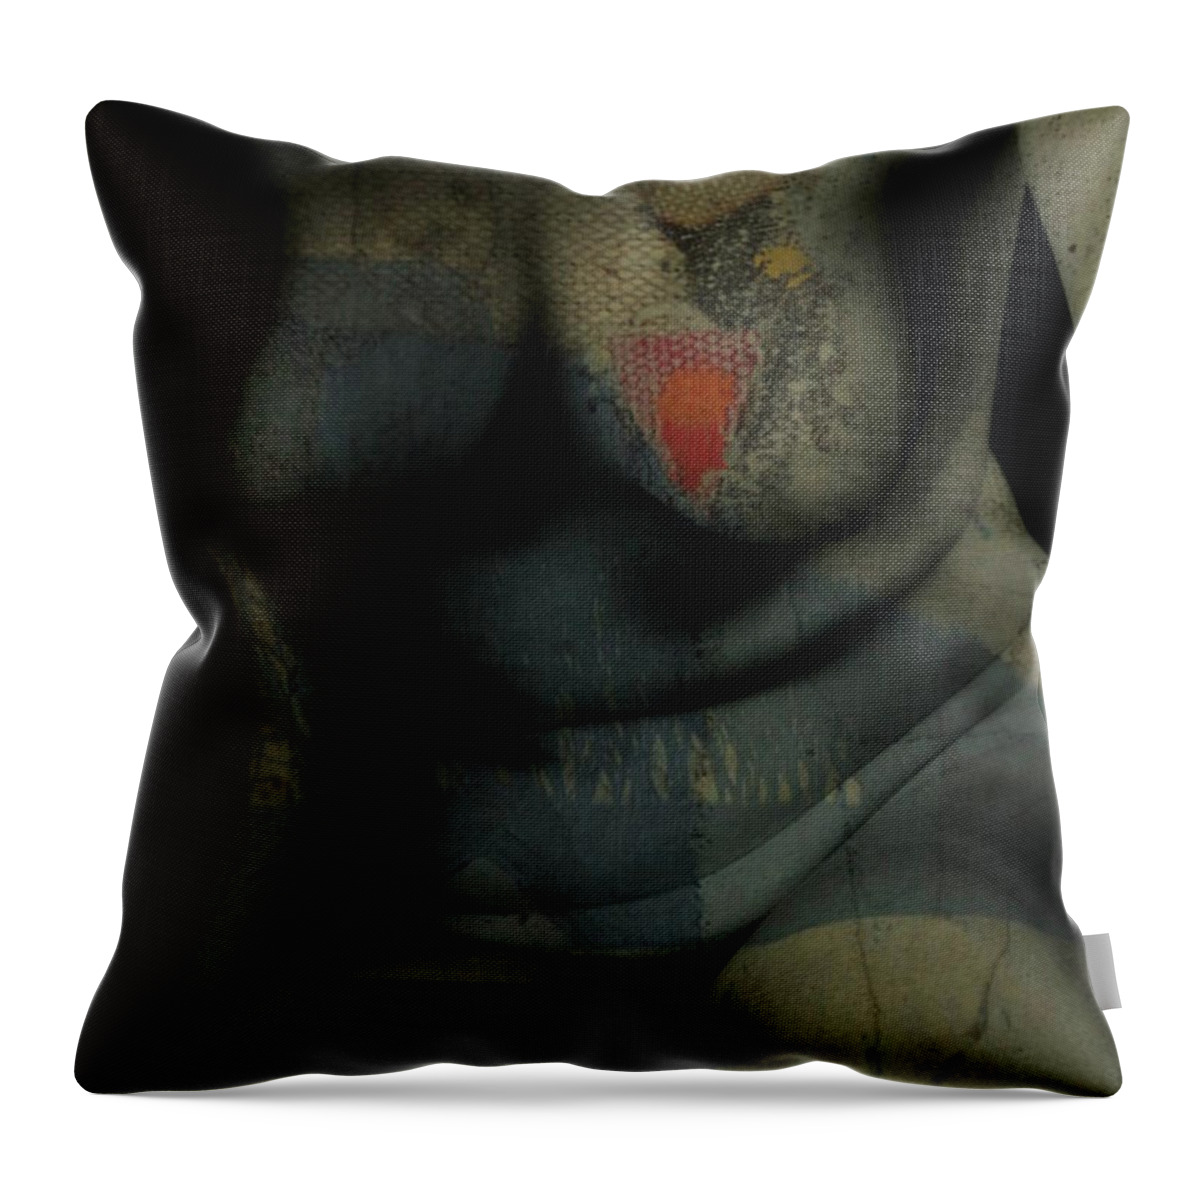 Nude Throw Pillow featuring the digital art Miss You - Digital by Paul Lovering